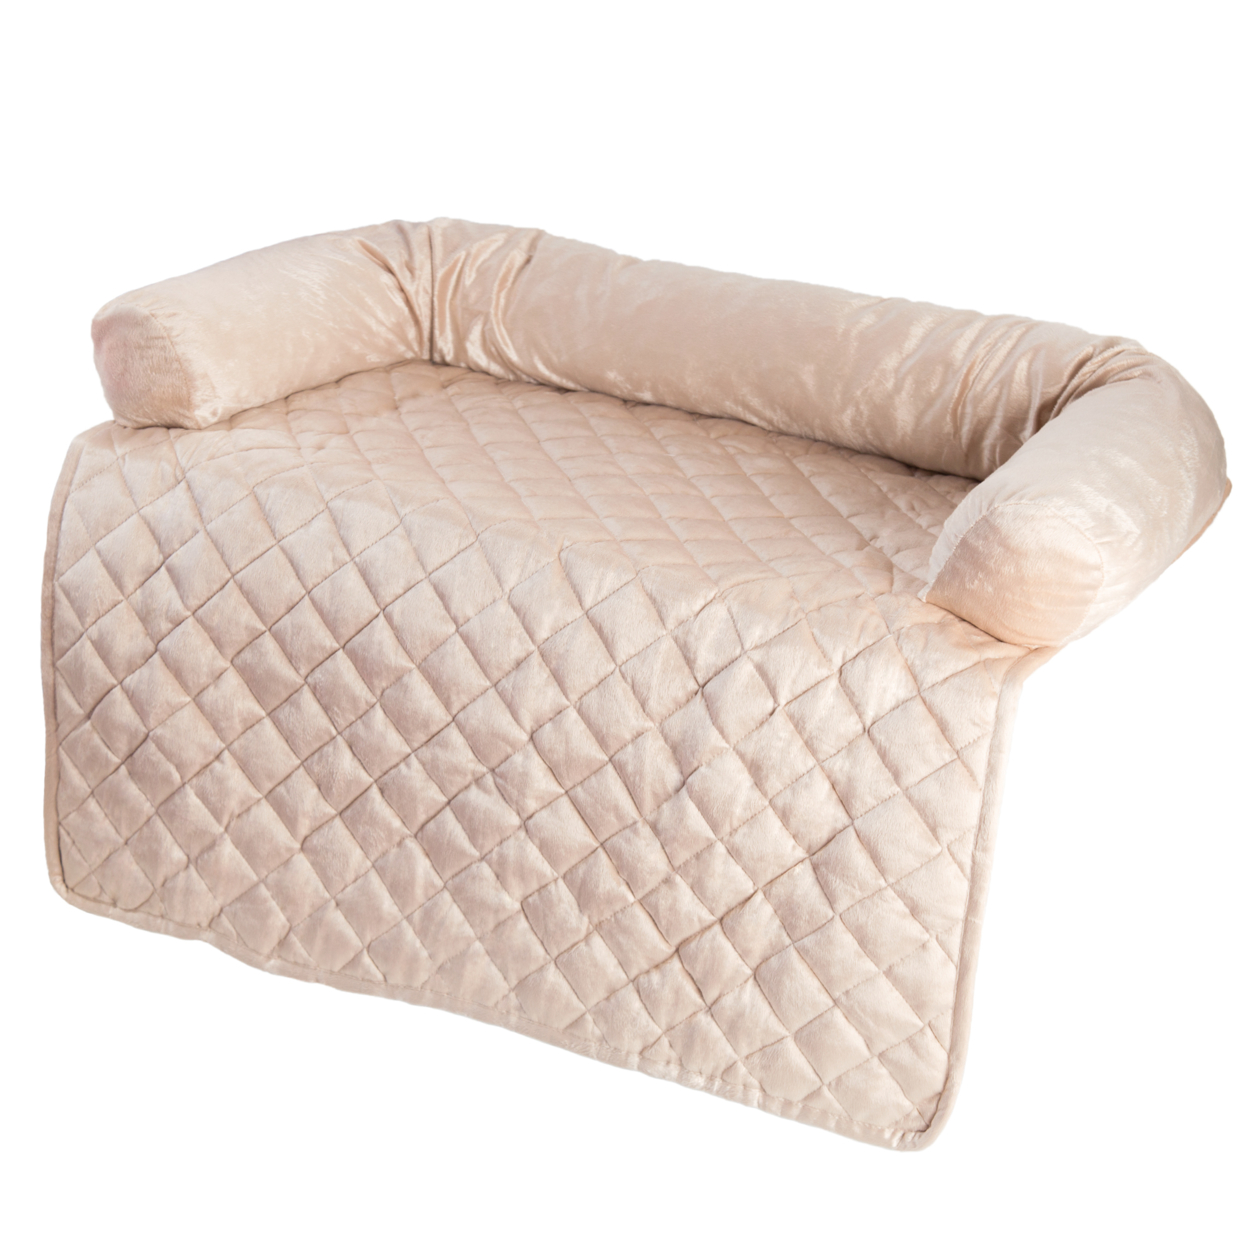 PETMAKER Furniture Protector Pet Cover With Bolster - Beige 35 X 35